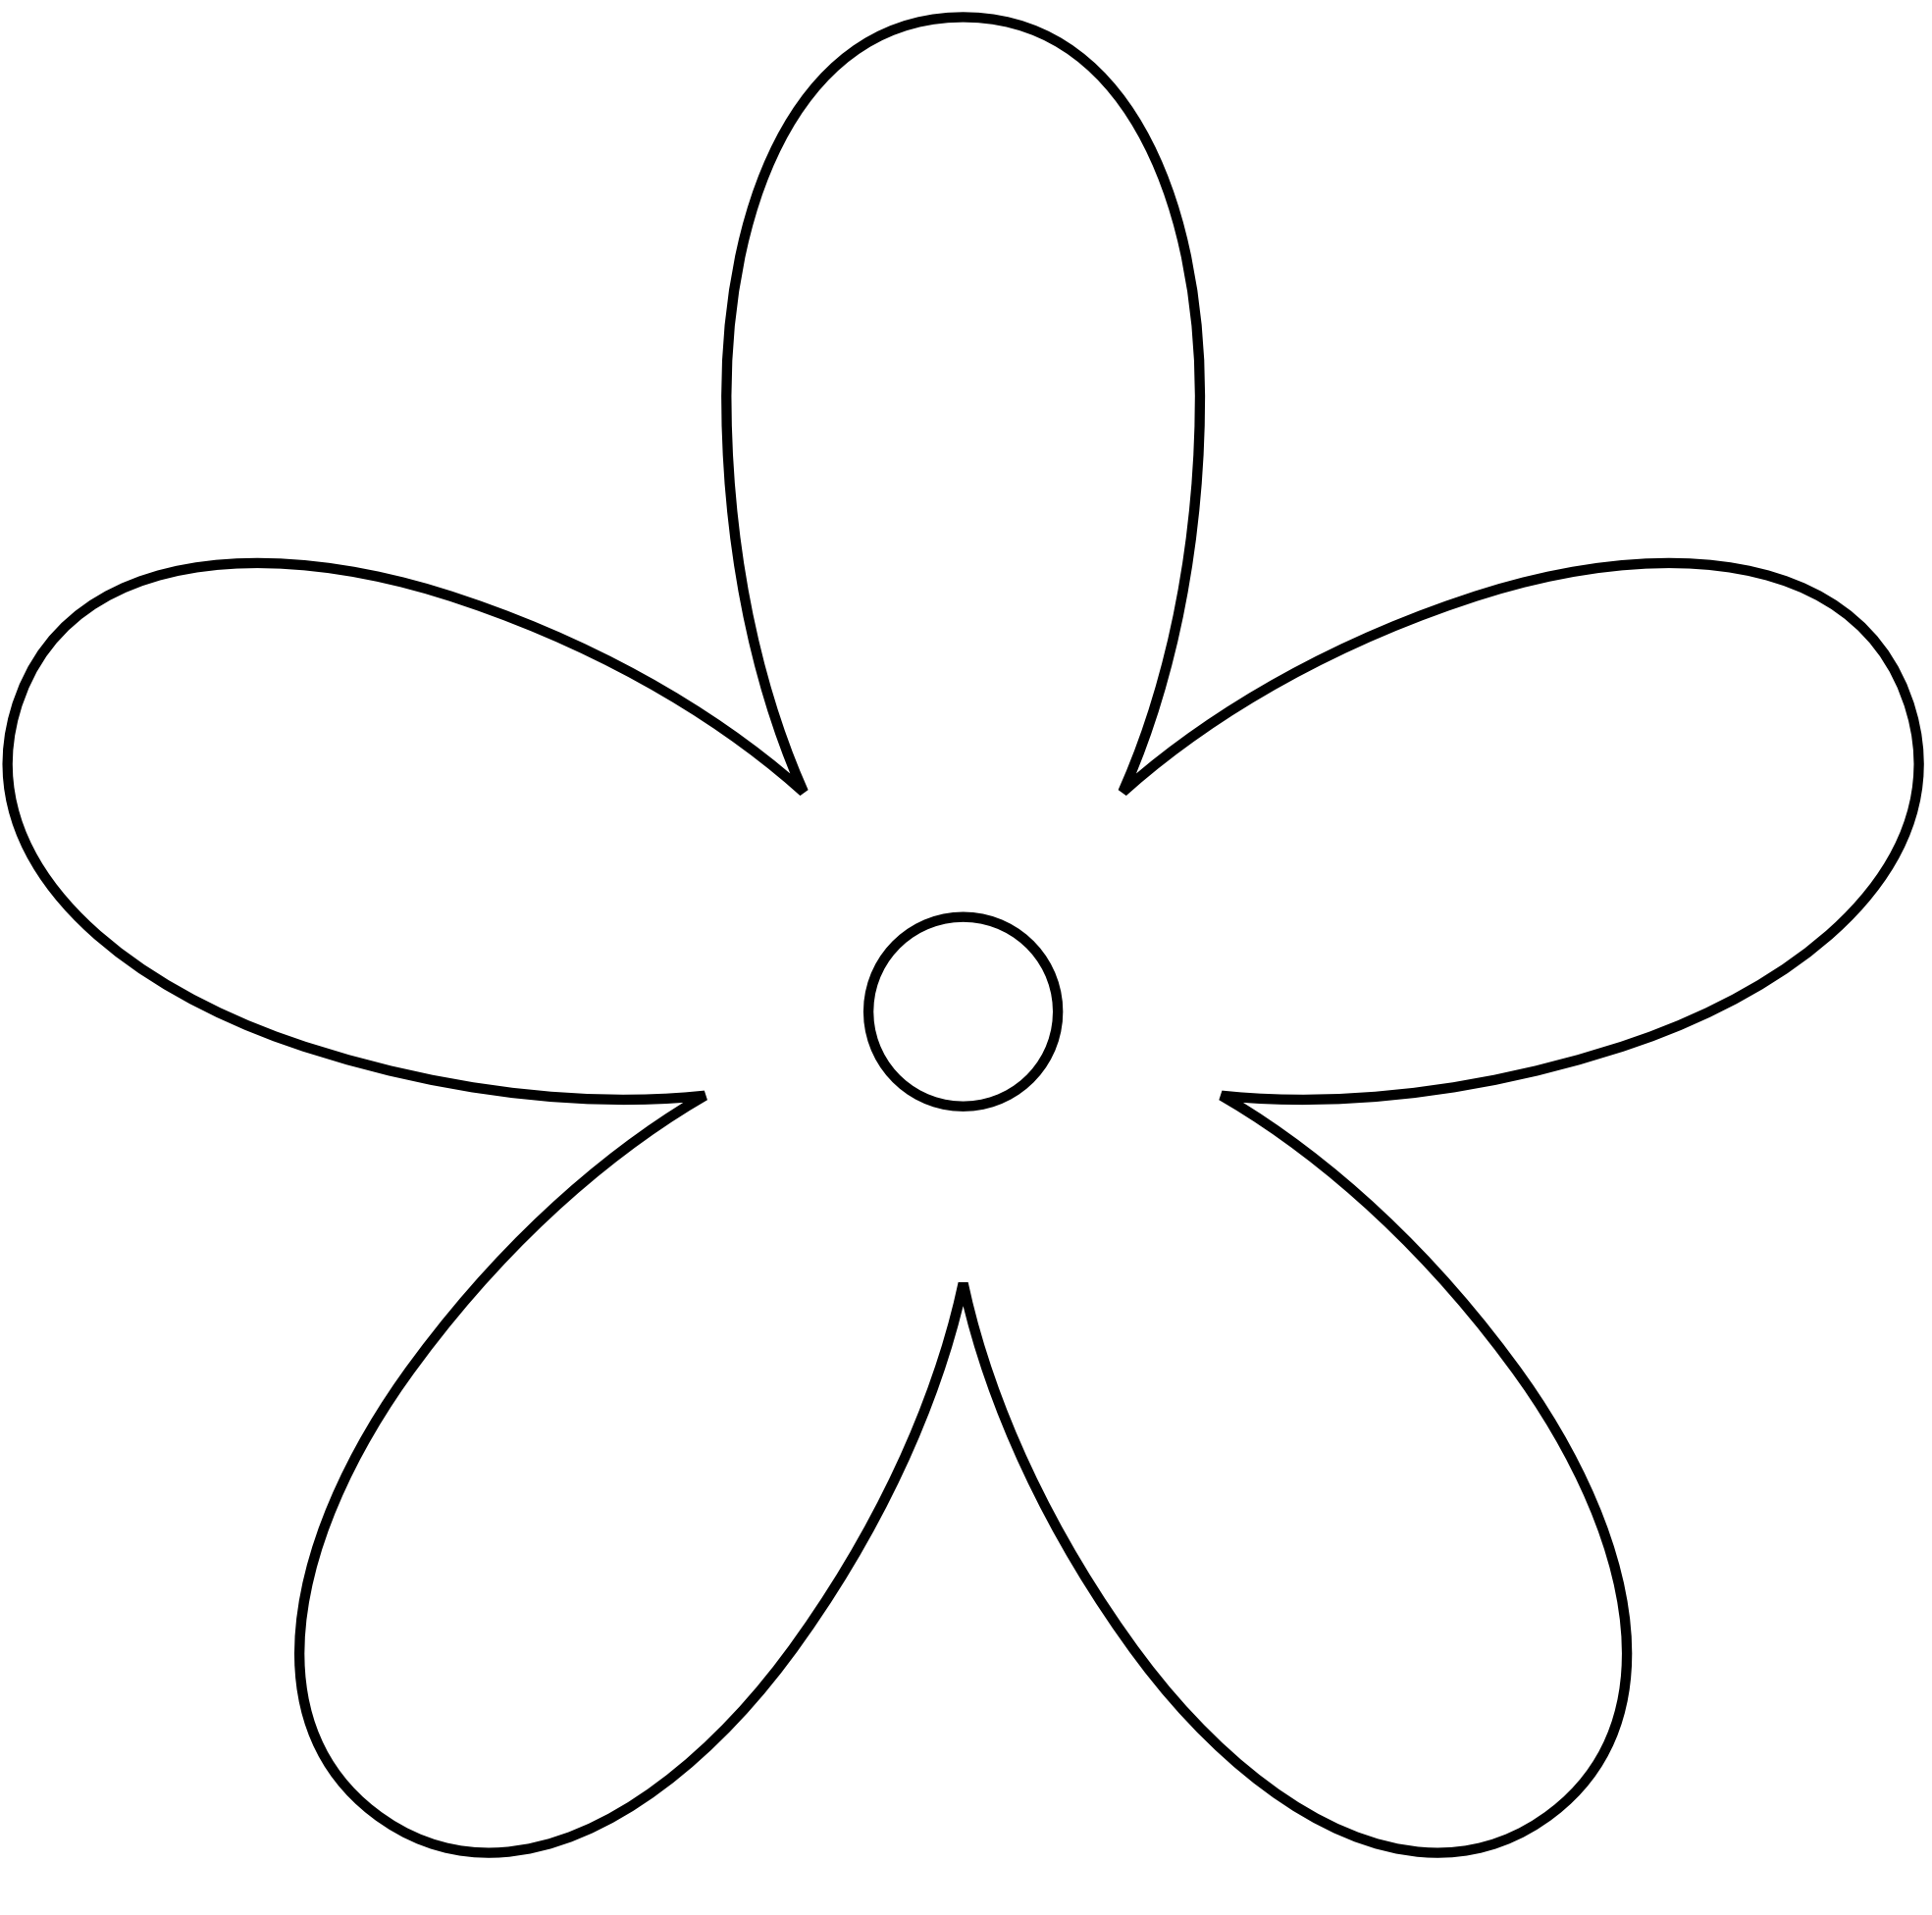 Black And White Flowers Pictures - Cliparts.co